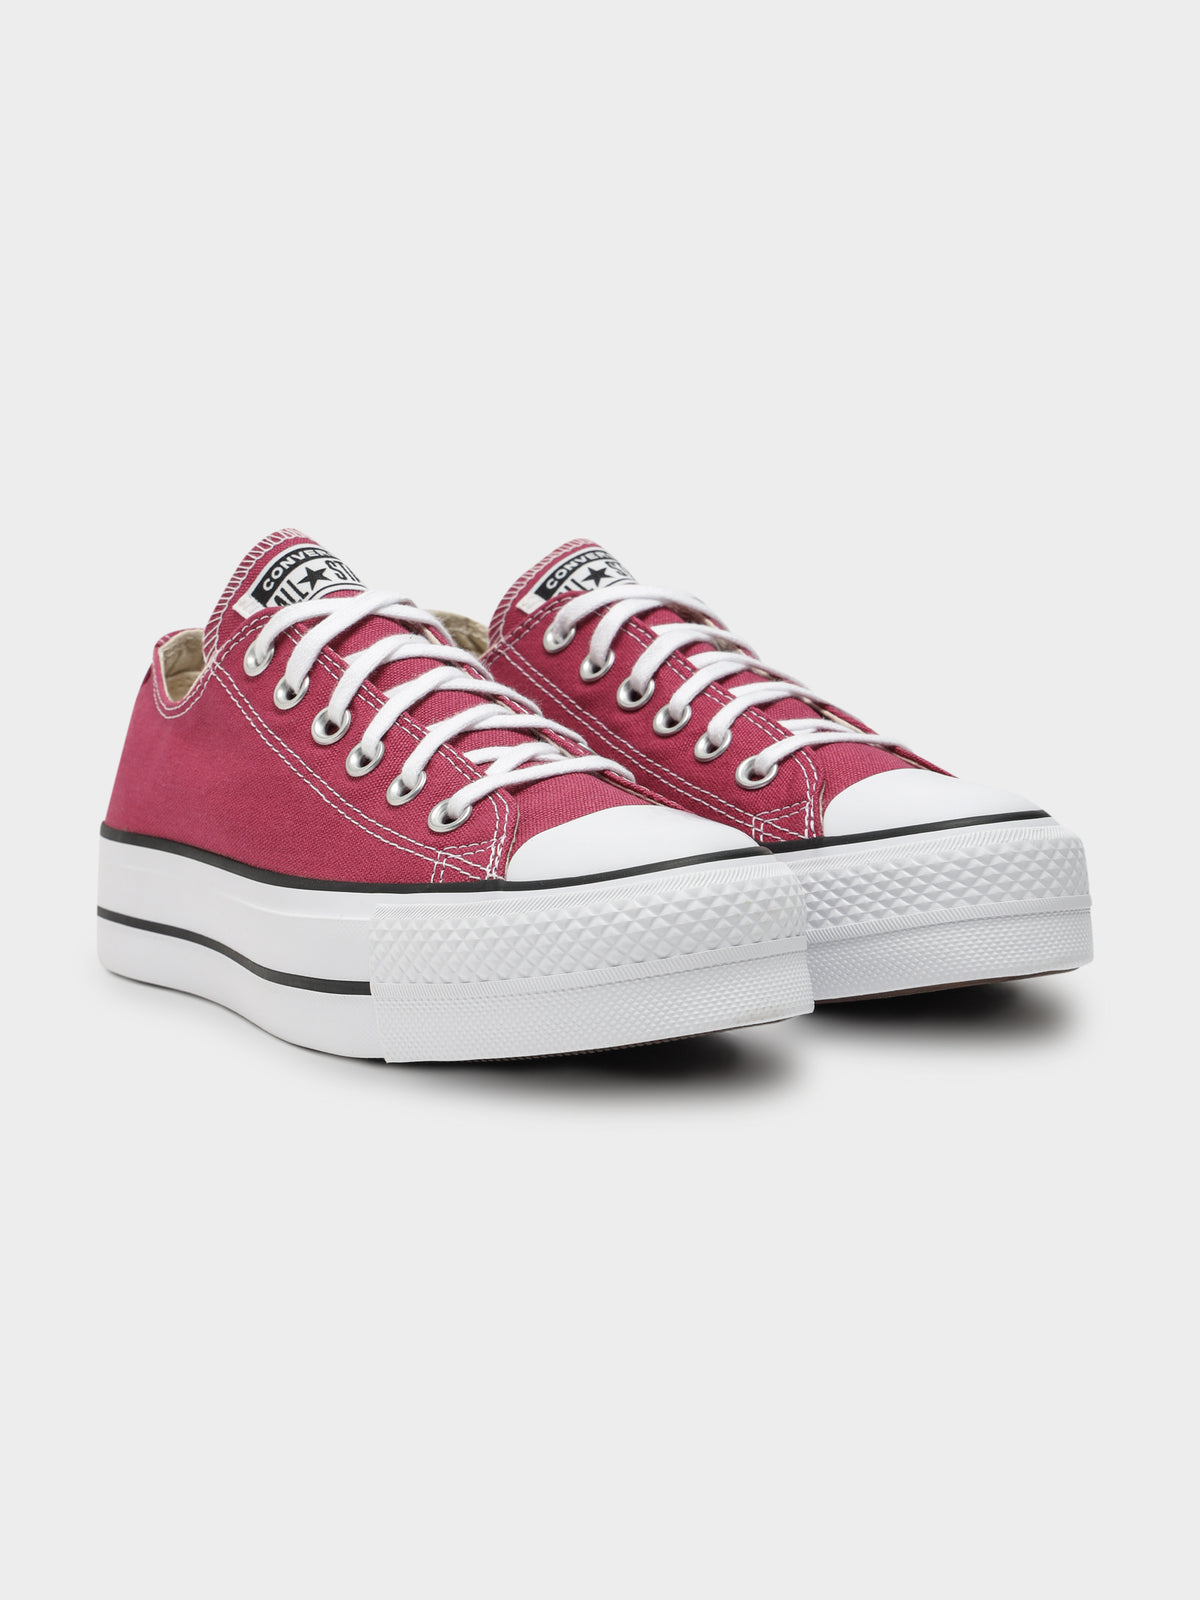 Womens Chuck Taylor All Star Lift Sneakers in Purple